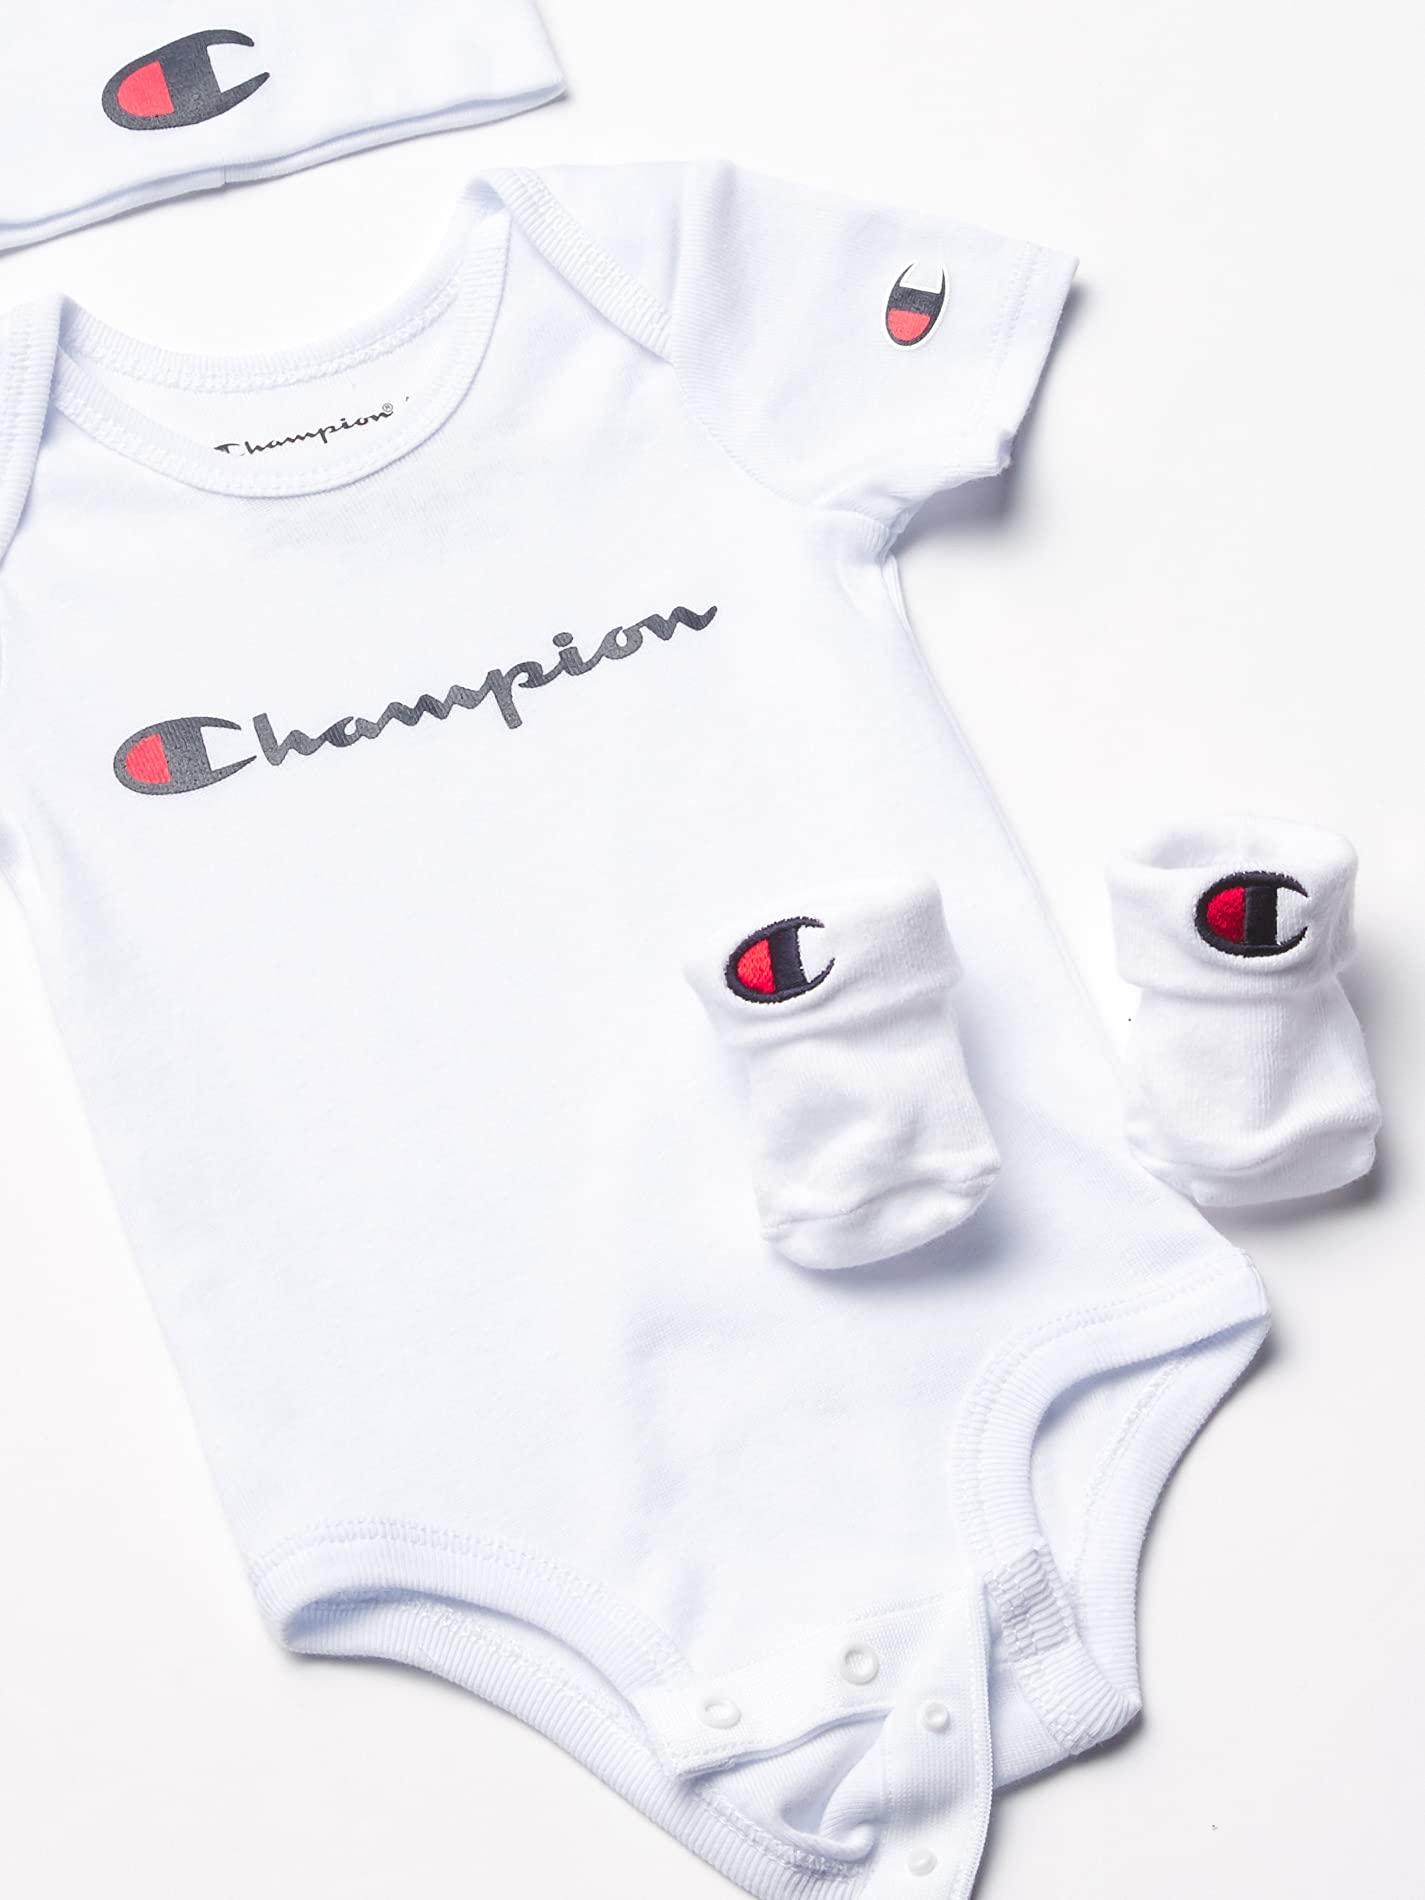 Champion unisex-baby 3-pc Box Set Includes an Infant Body Suit, a Bib Or Hat & Pair of Booties in Multiple Colors Size 0-6m